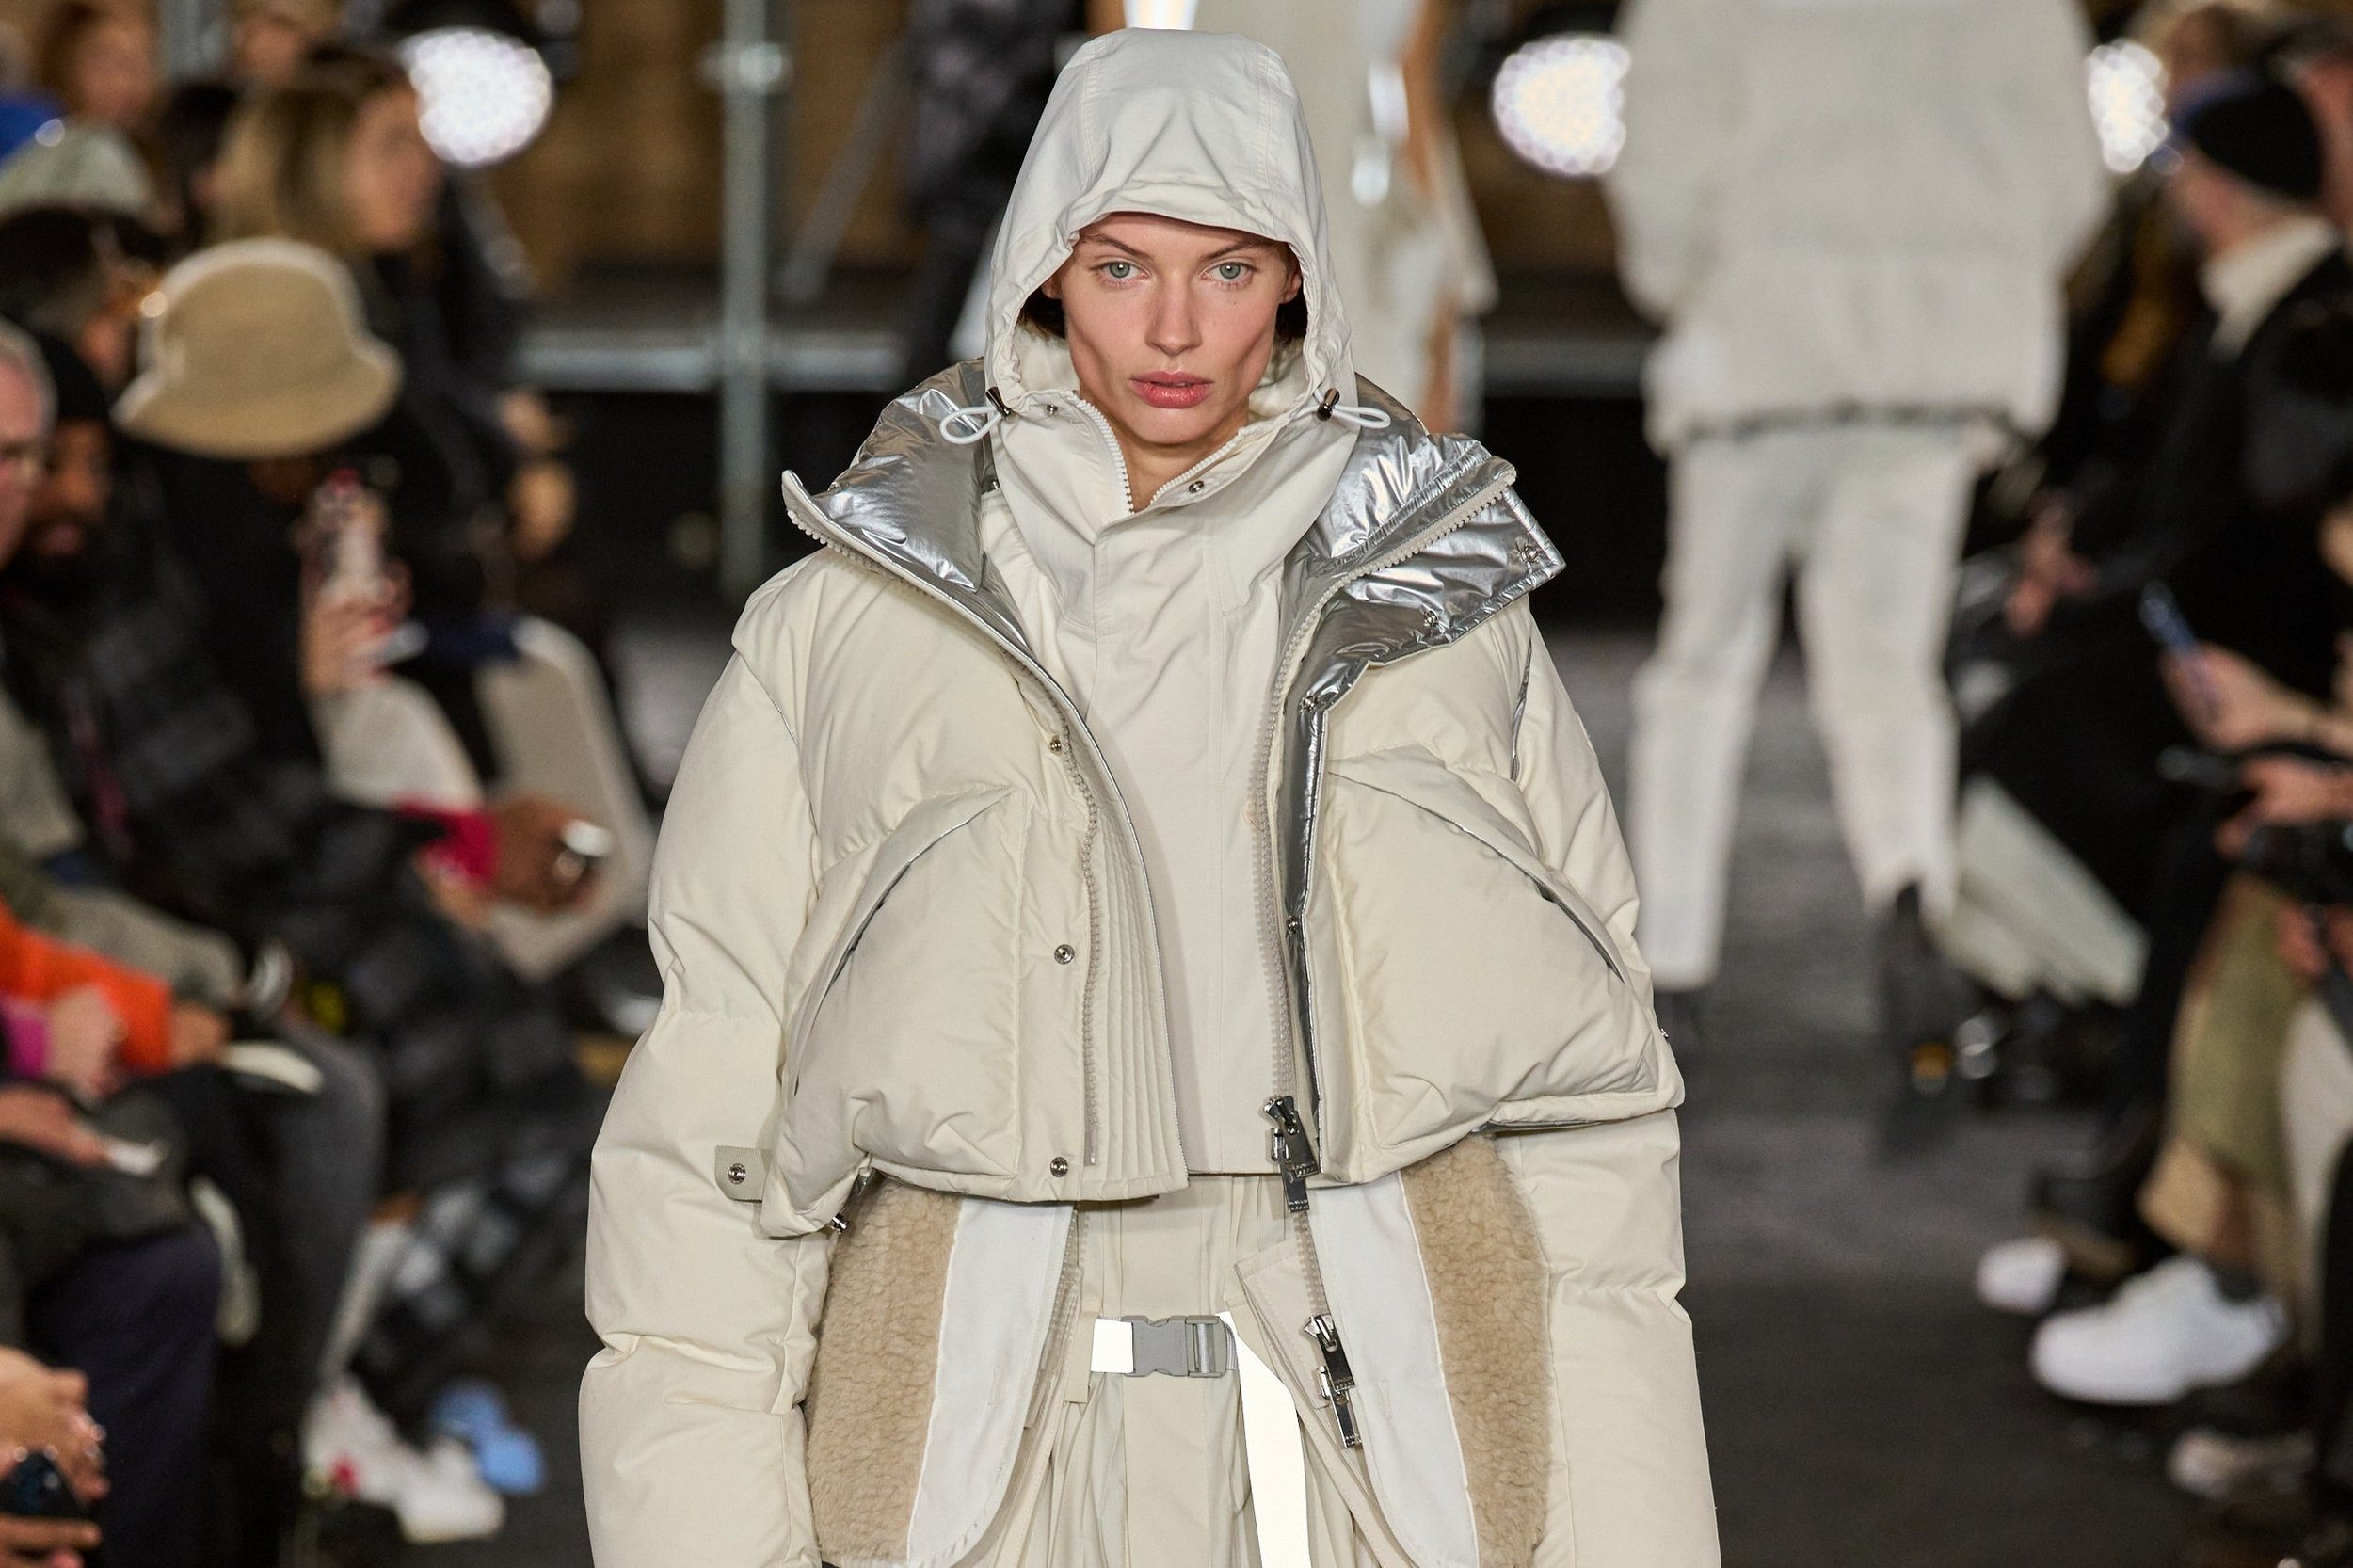 sacai Announces Collaborations With Carhartt and Moncler for